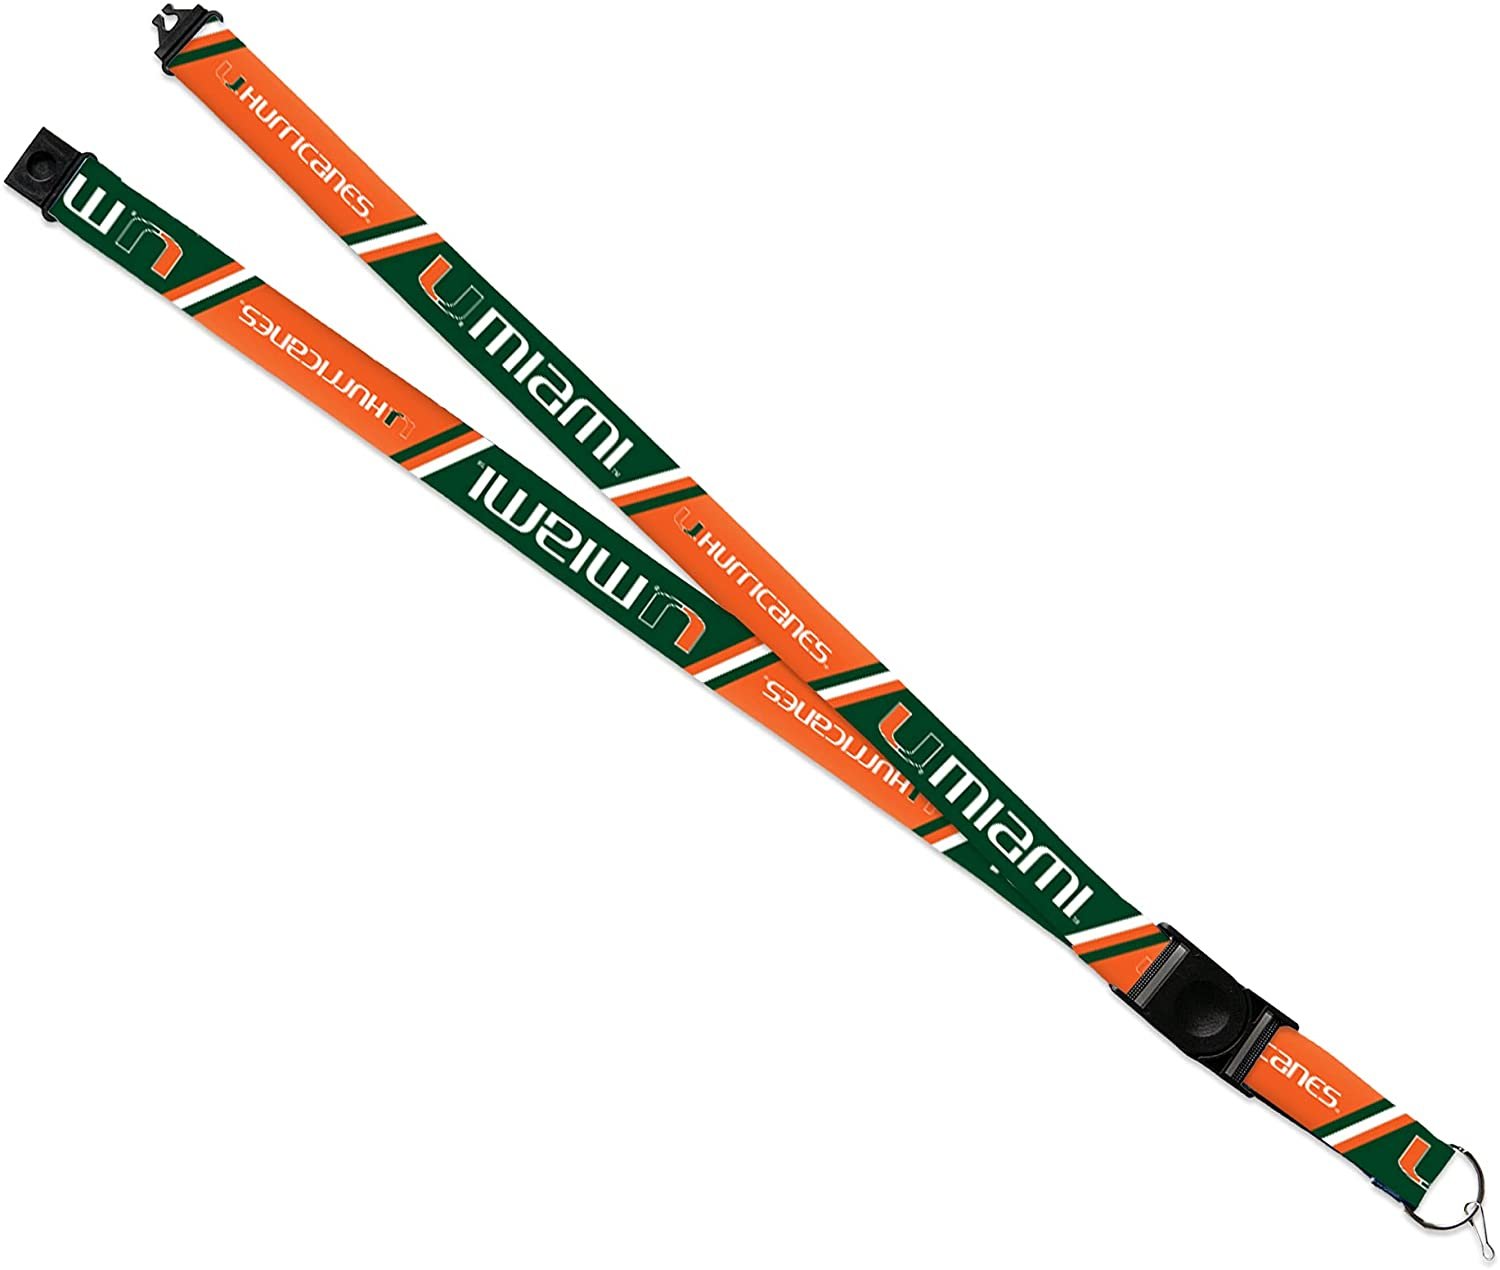 University of Miami Hurricanes Lanyard Keychain Double Sided 18 Inch Button Clip Safety Breakaway